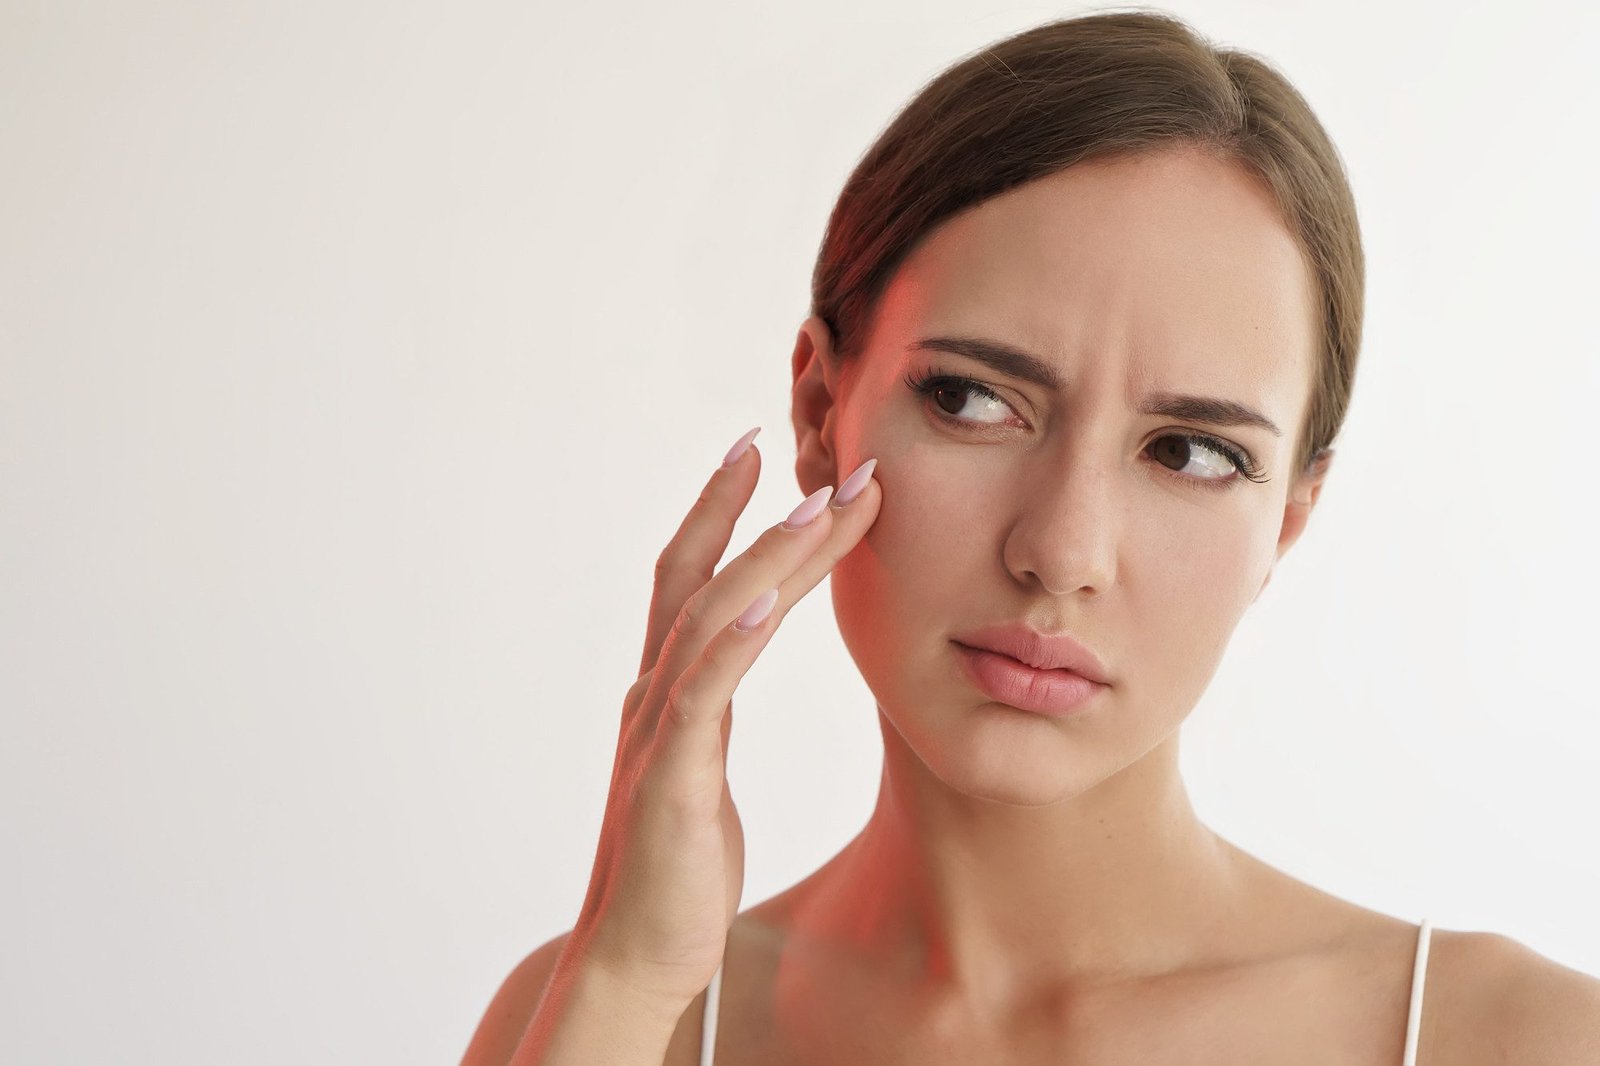 Feeling Itchy? Find Out What Can Cause Dry Skin